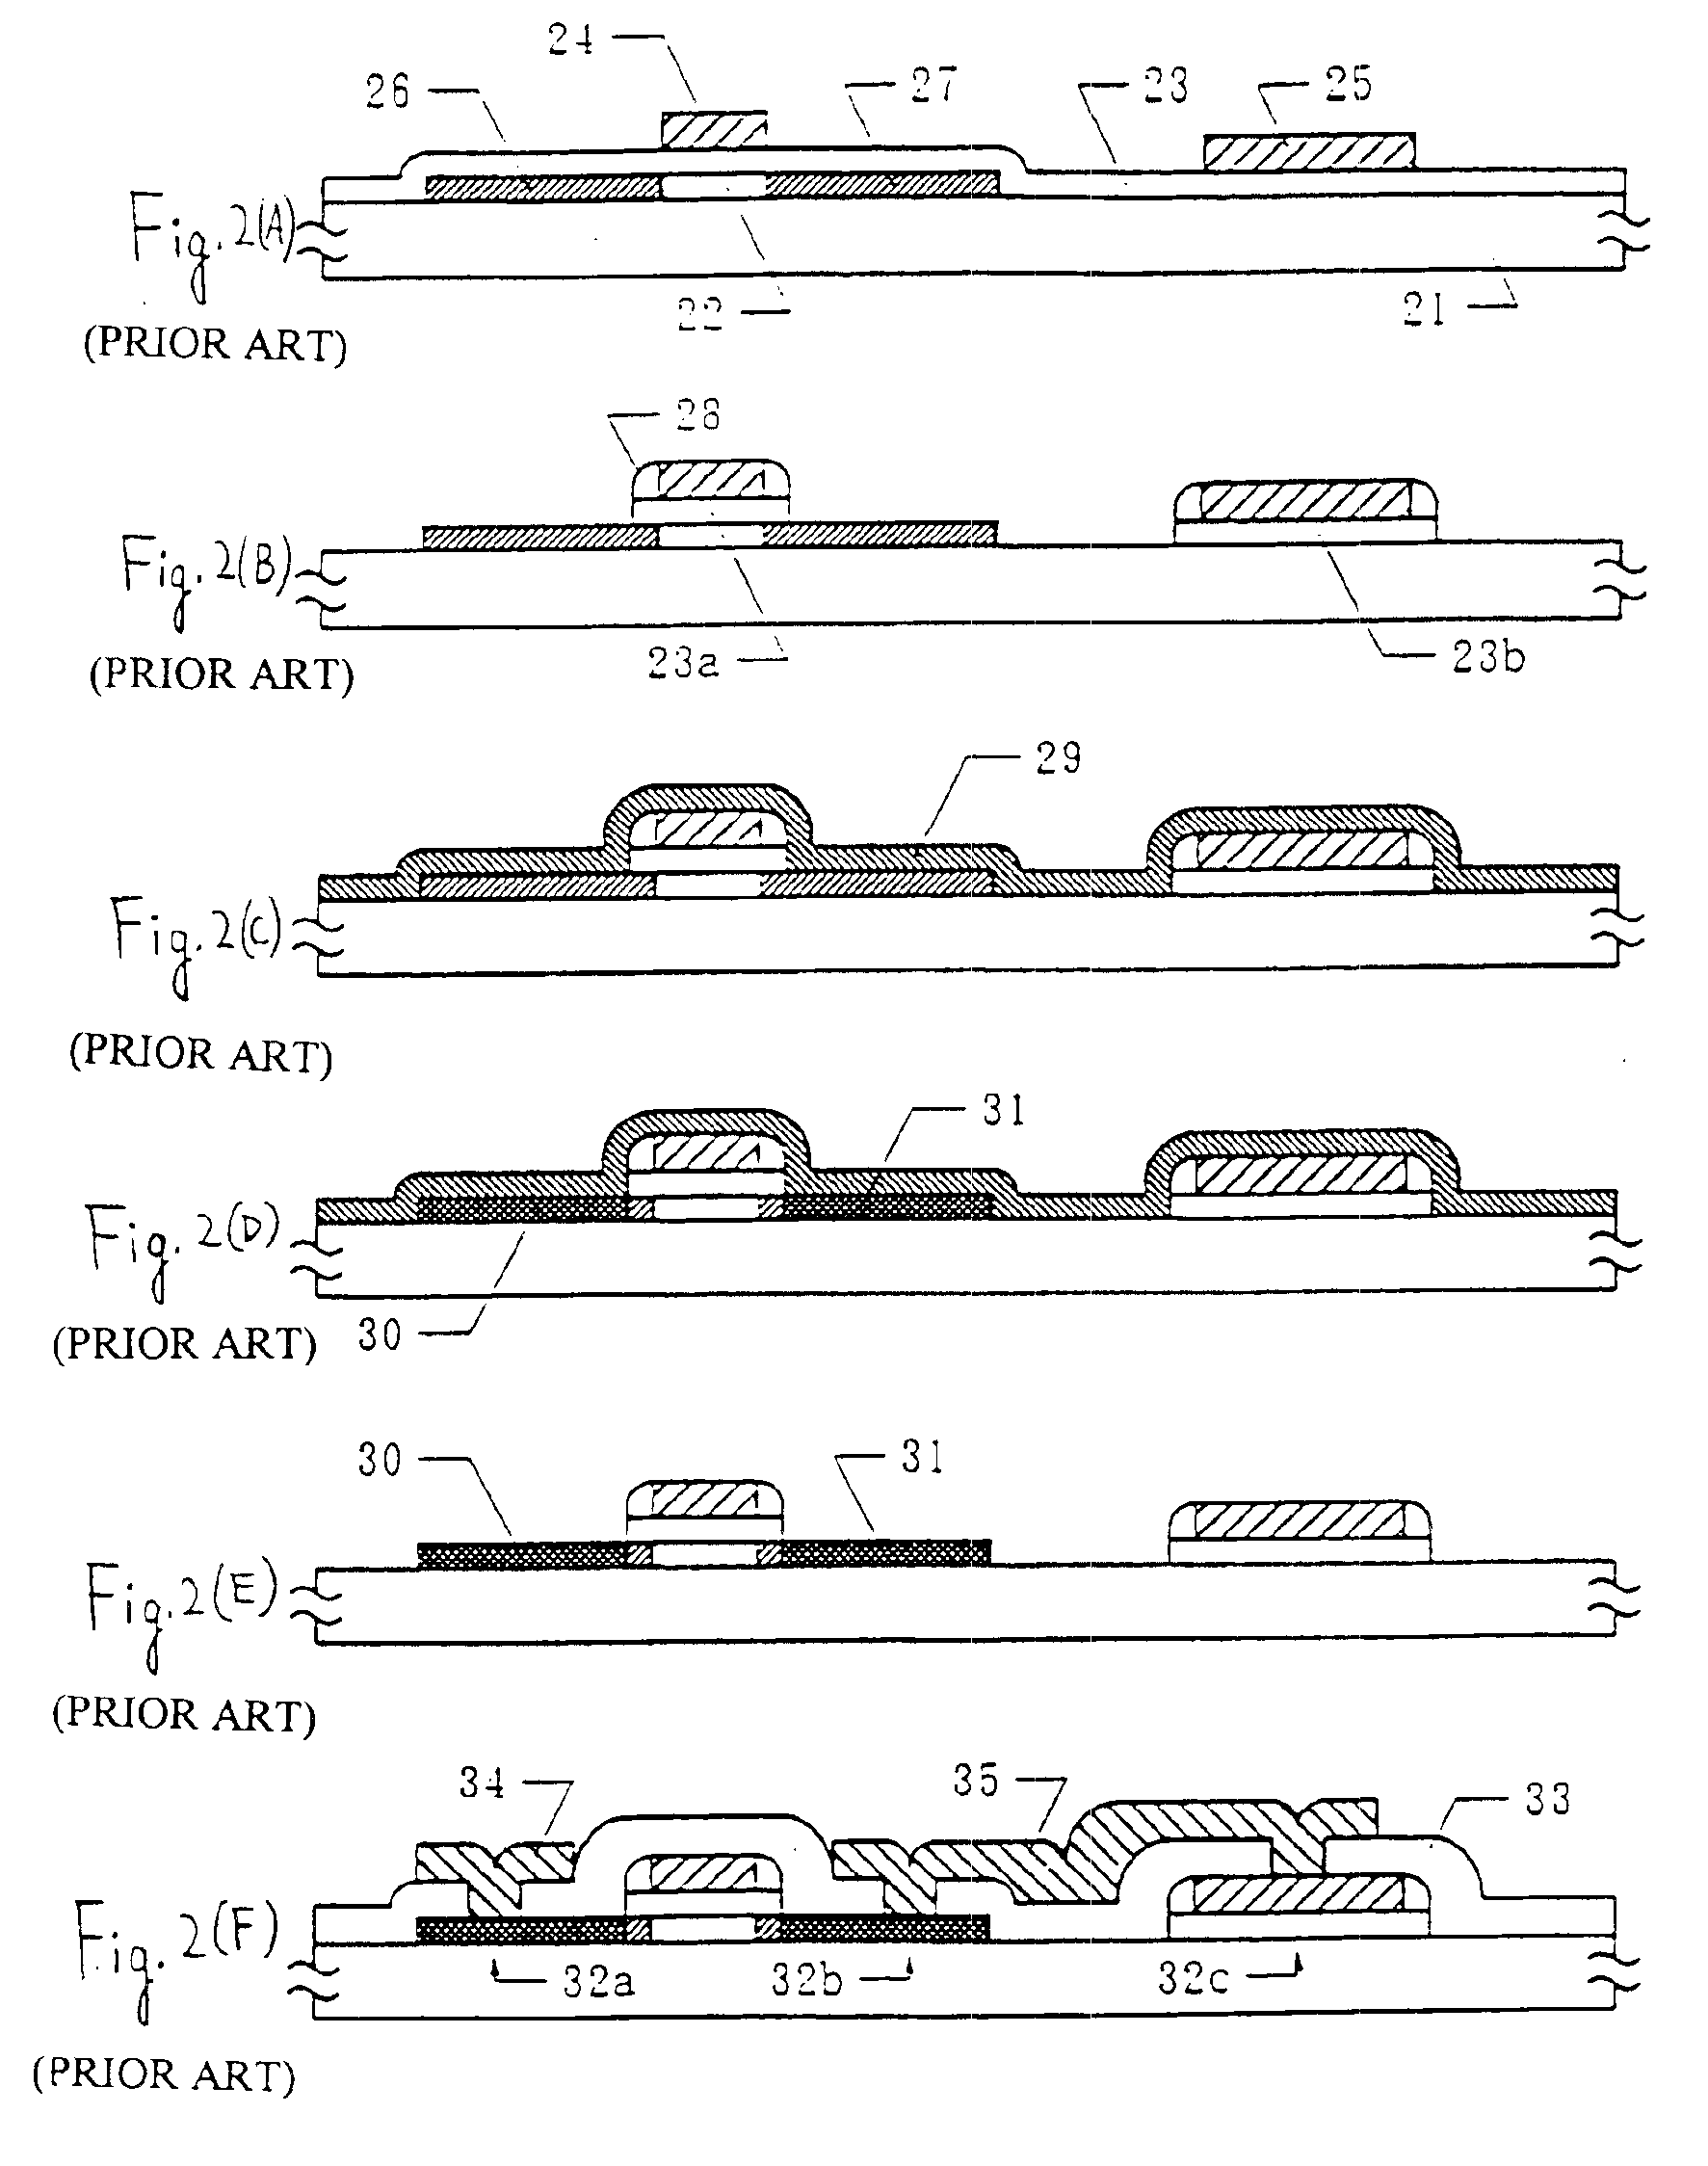 Semiconductor device that include silicide layers